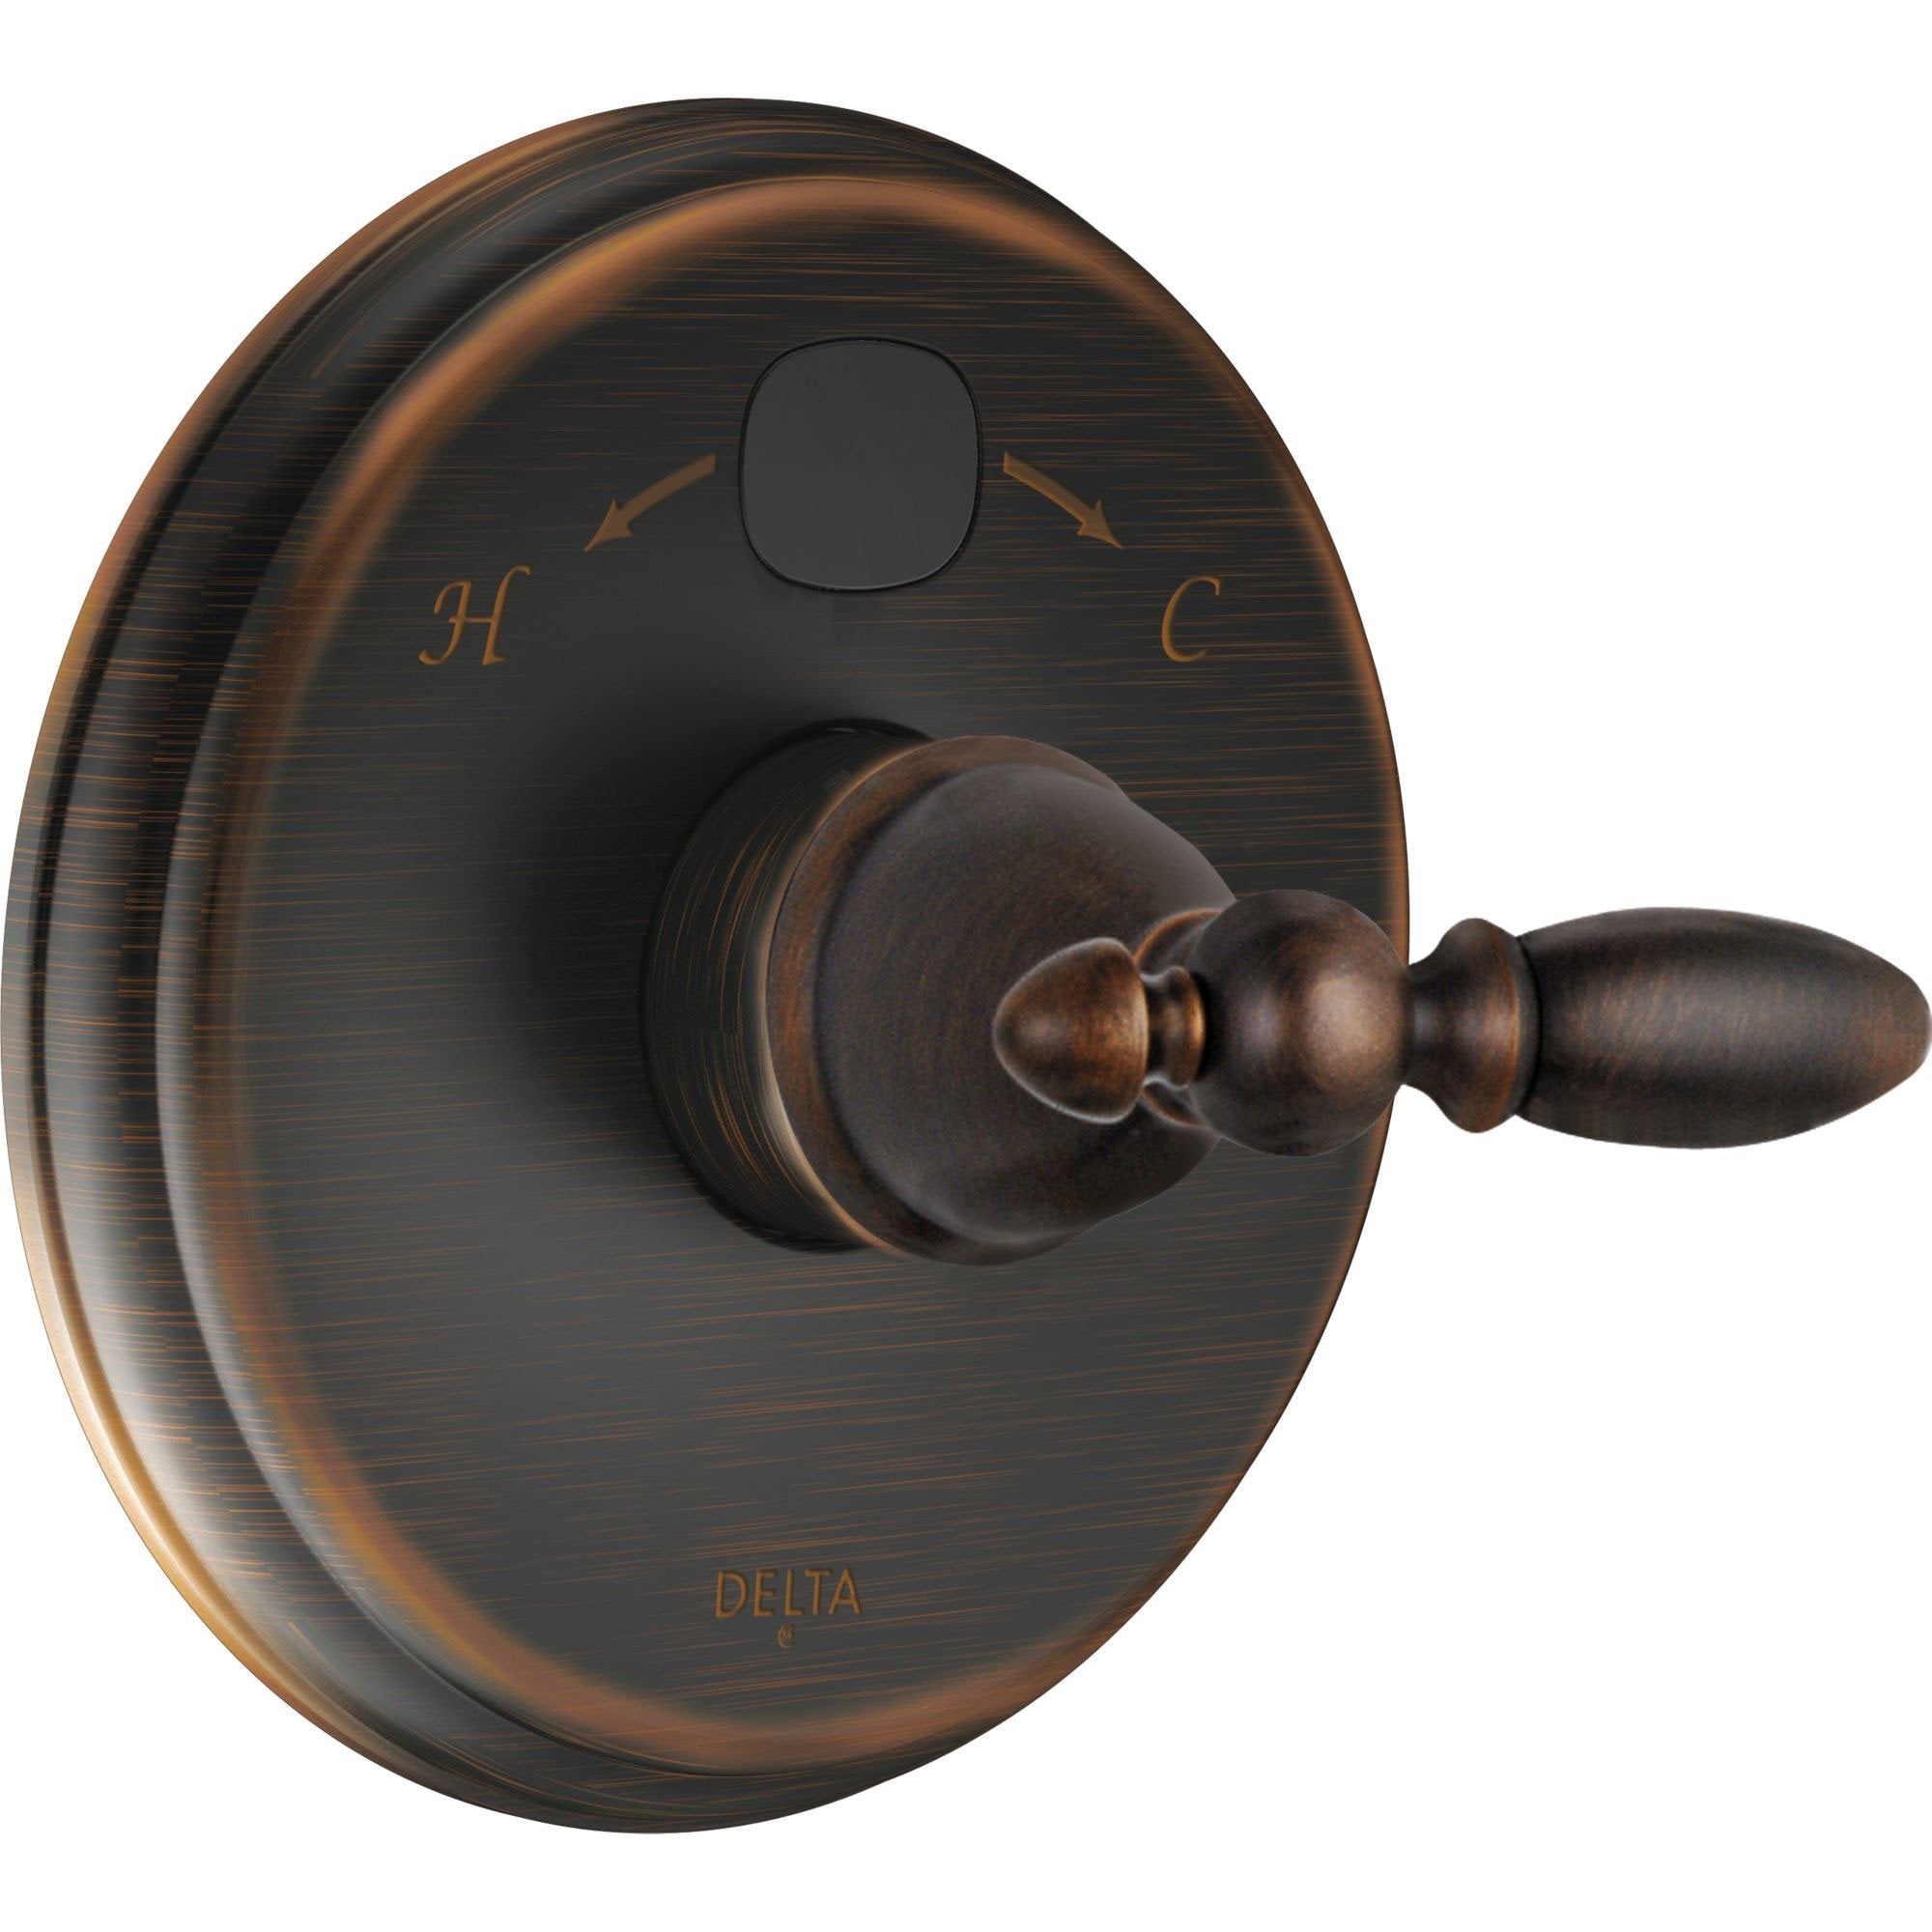 Delta Traditional 14 Series Temp2O Venetian Bronze Finish Pressure Balanced Shower Faucet Control with Digital Display INCLUDES Rough-in Valve and Single Lever Handle D1280V